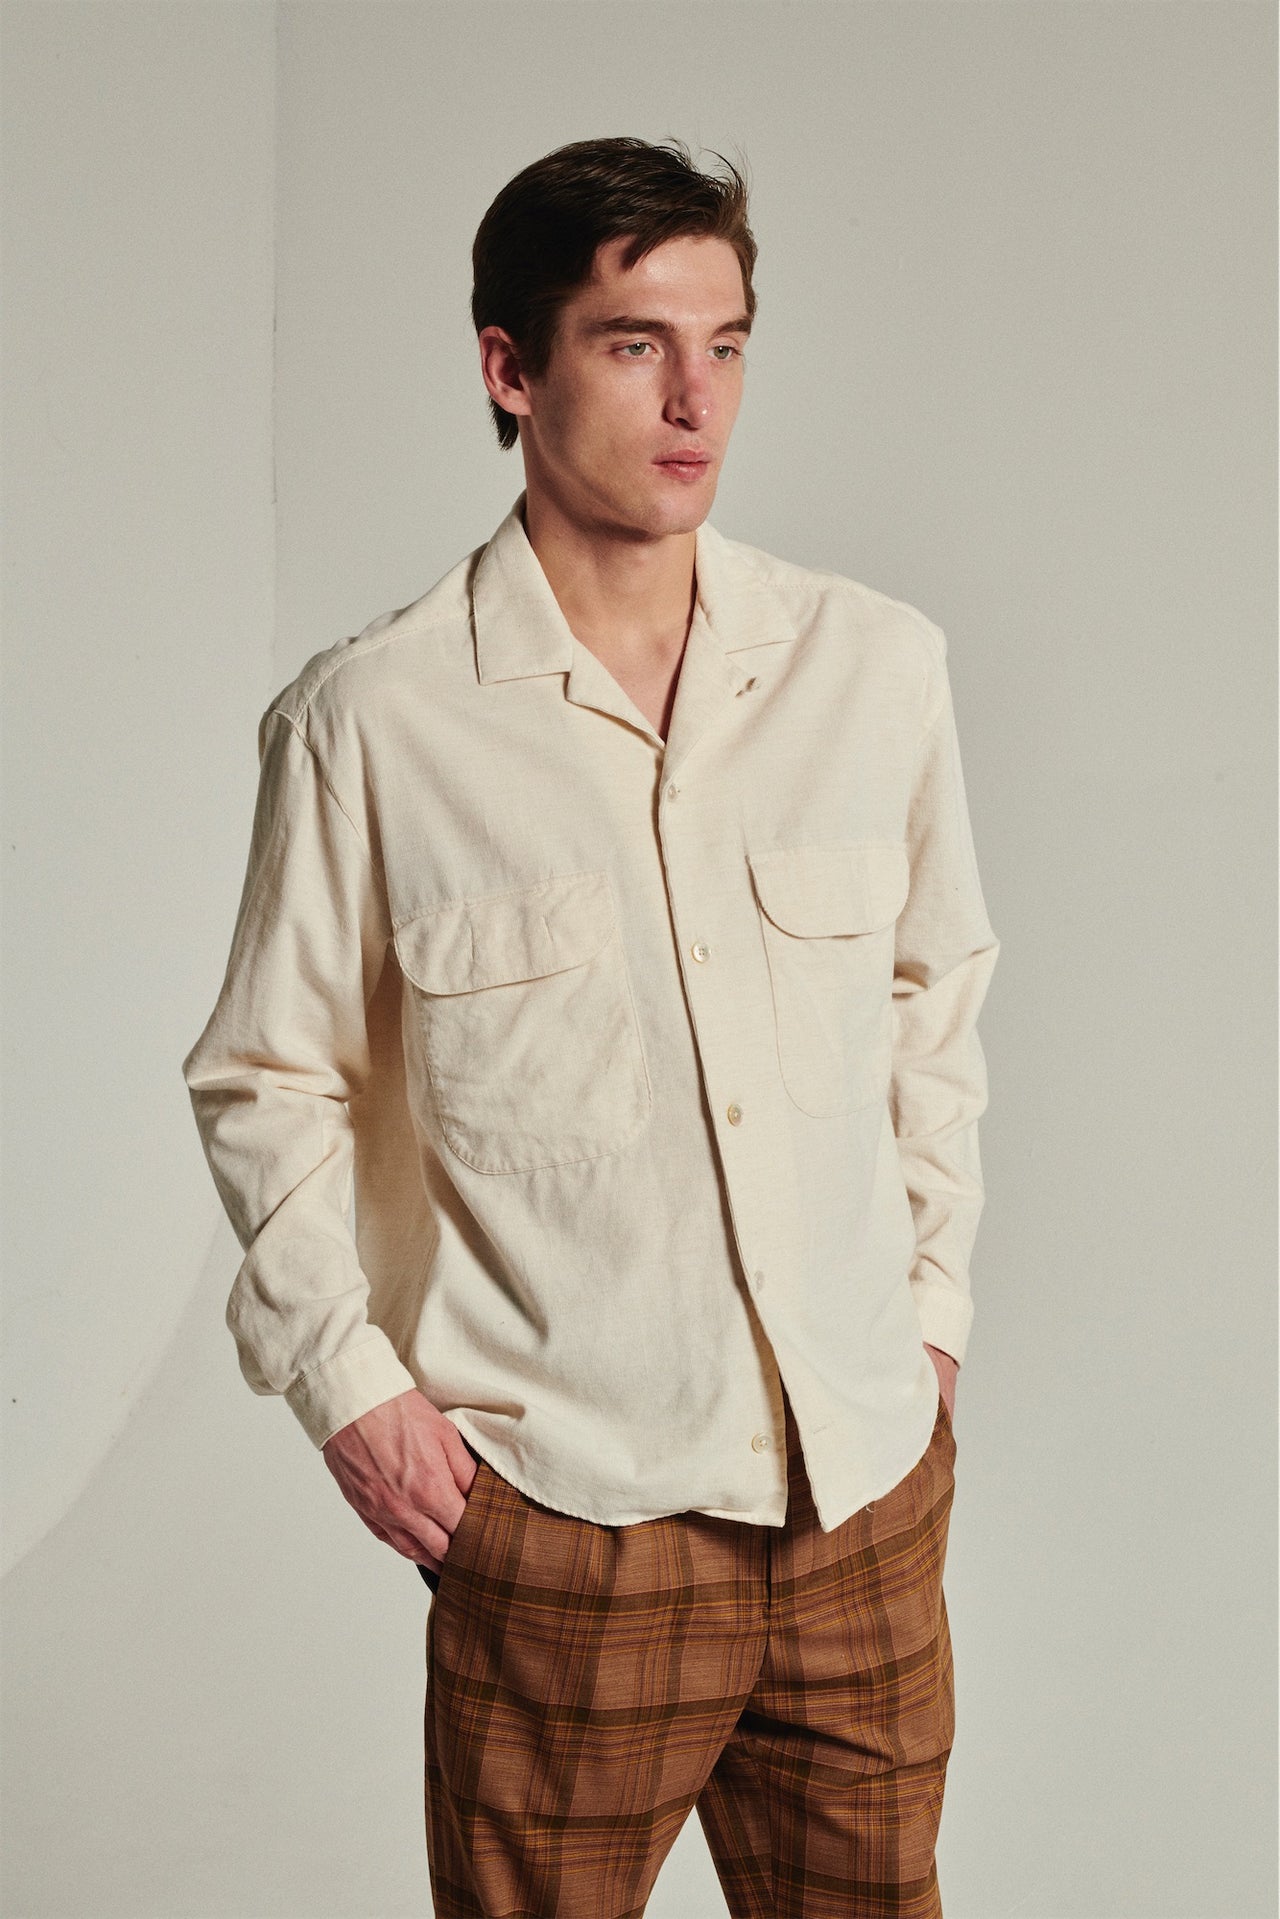 Relaxed Oversized Leisure Shirt in a Creamy Japanese Baby Corduroy Cotton